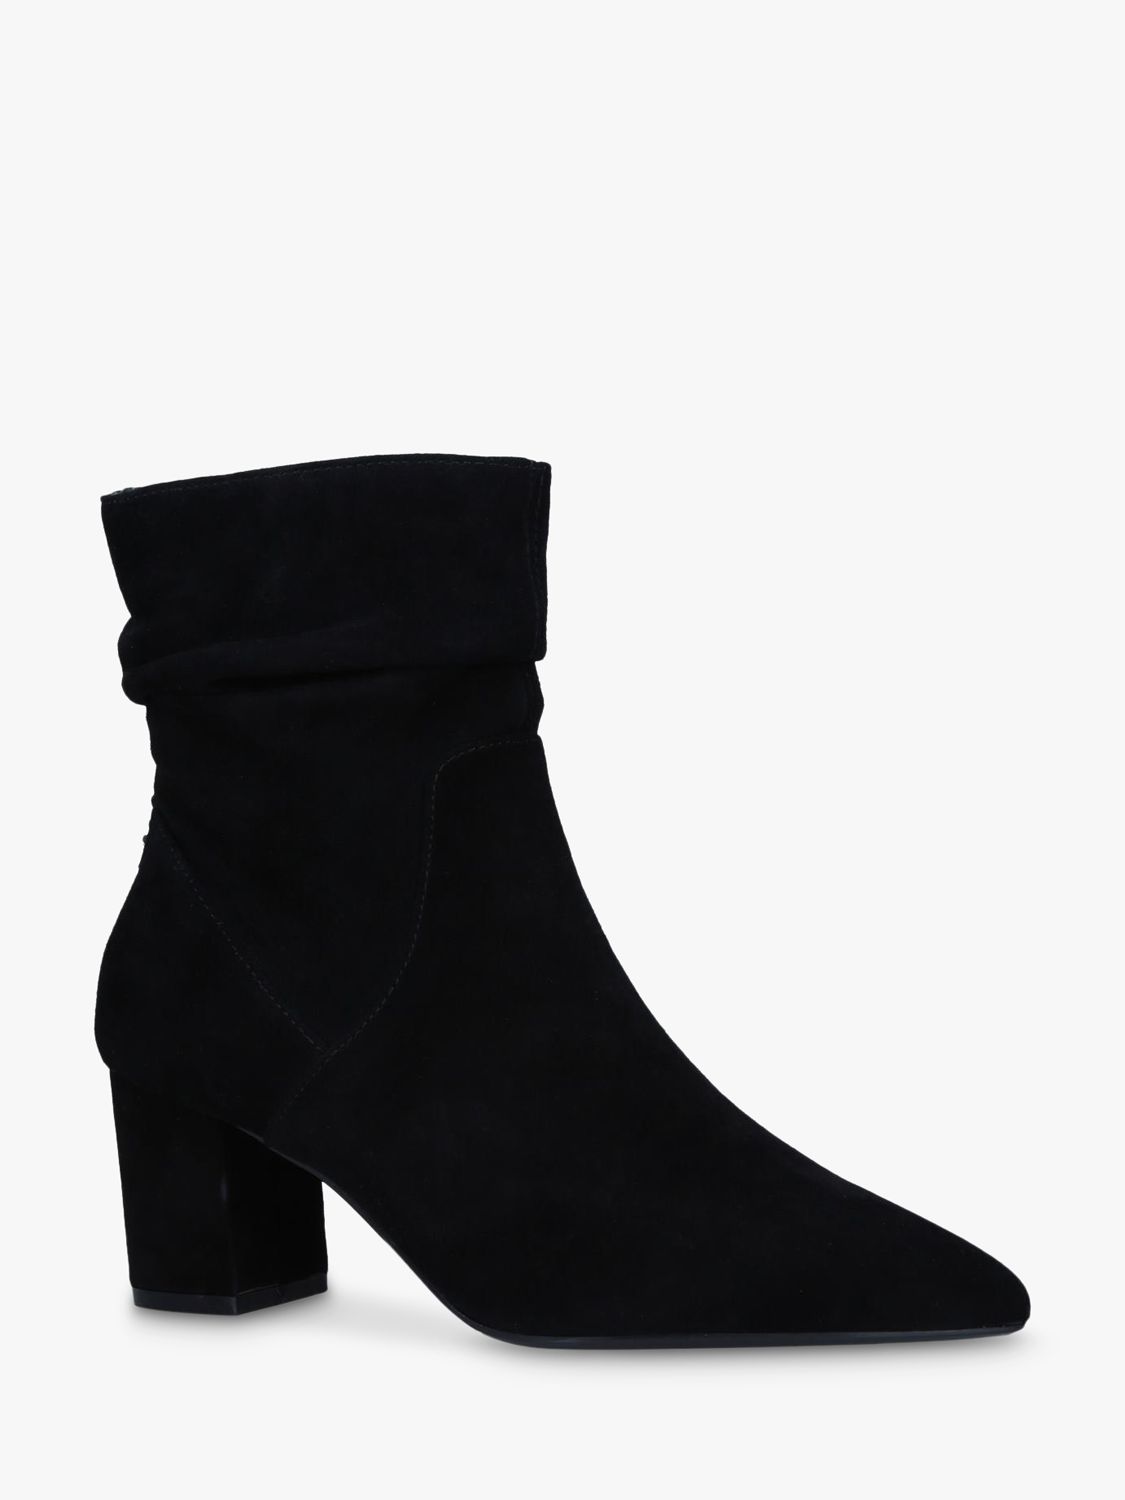 Carvela Admire Low Slouch Suede Ankle Boots, Black at John Lewis & Partners